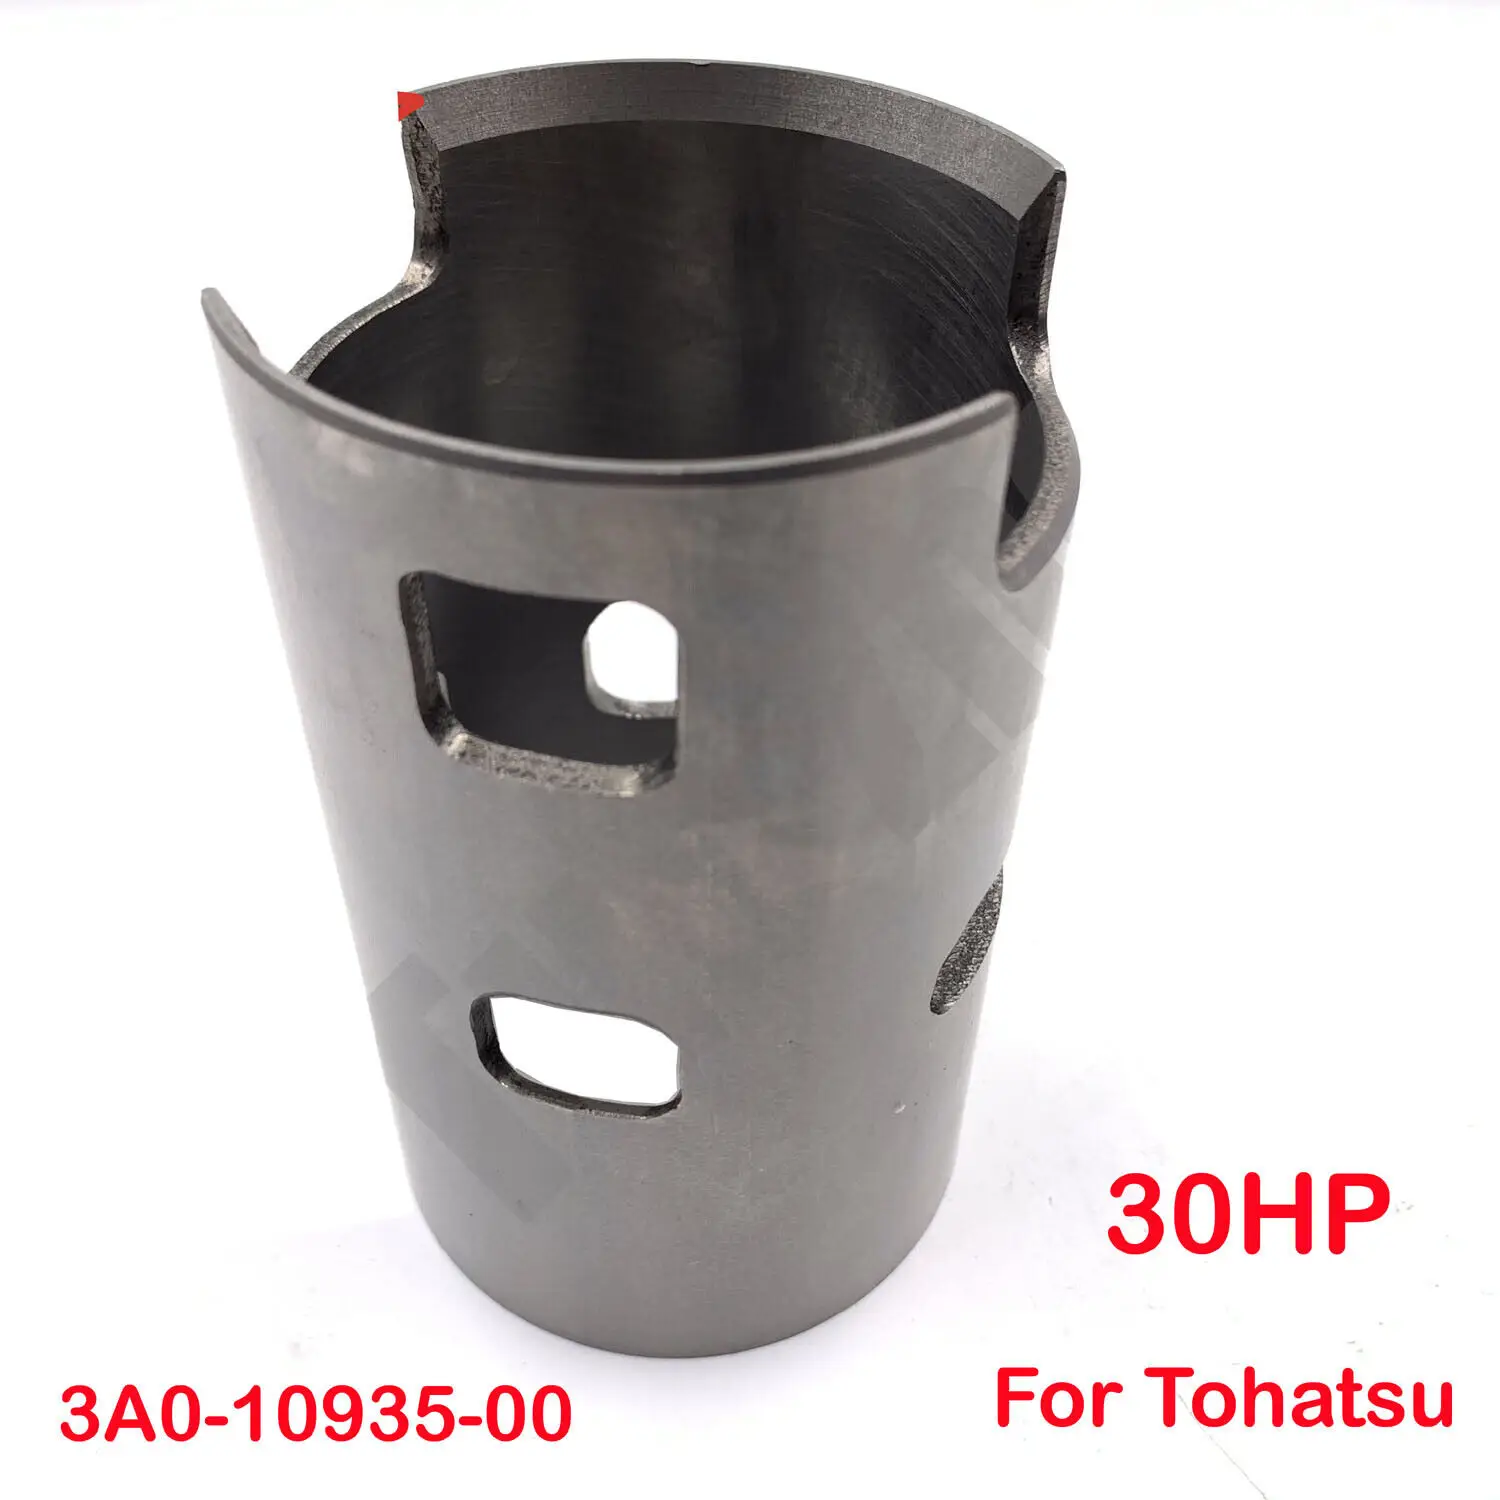 

Cylinder Liner Sleeve For Tohatsu 30HP outboard boat engine motor 3A0-10935-00